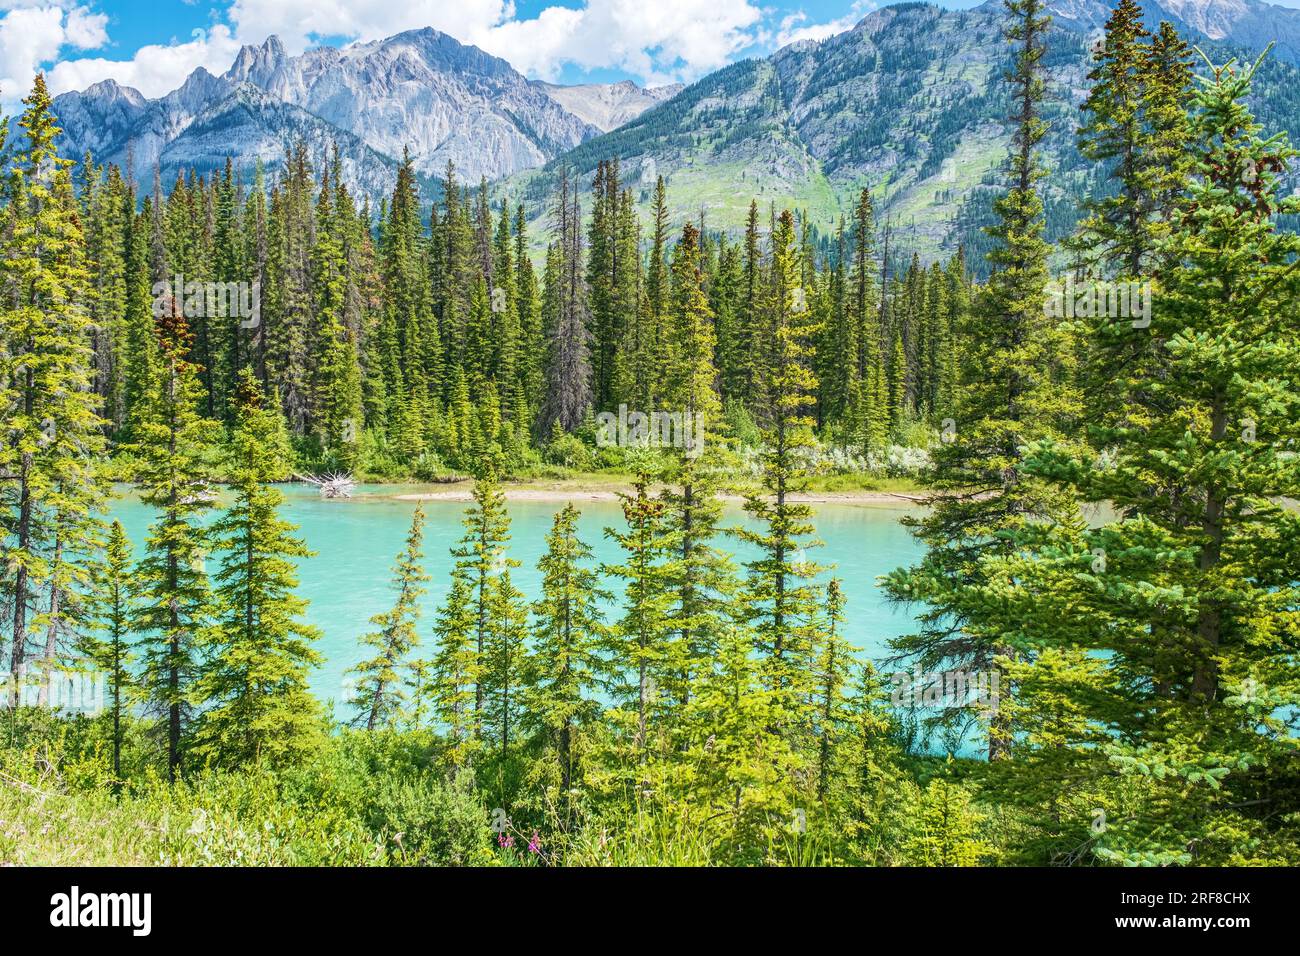 A beautiful blue river flows theough a forest in Banff National Park. Stock Photo